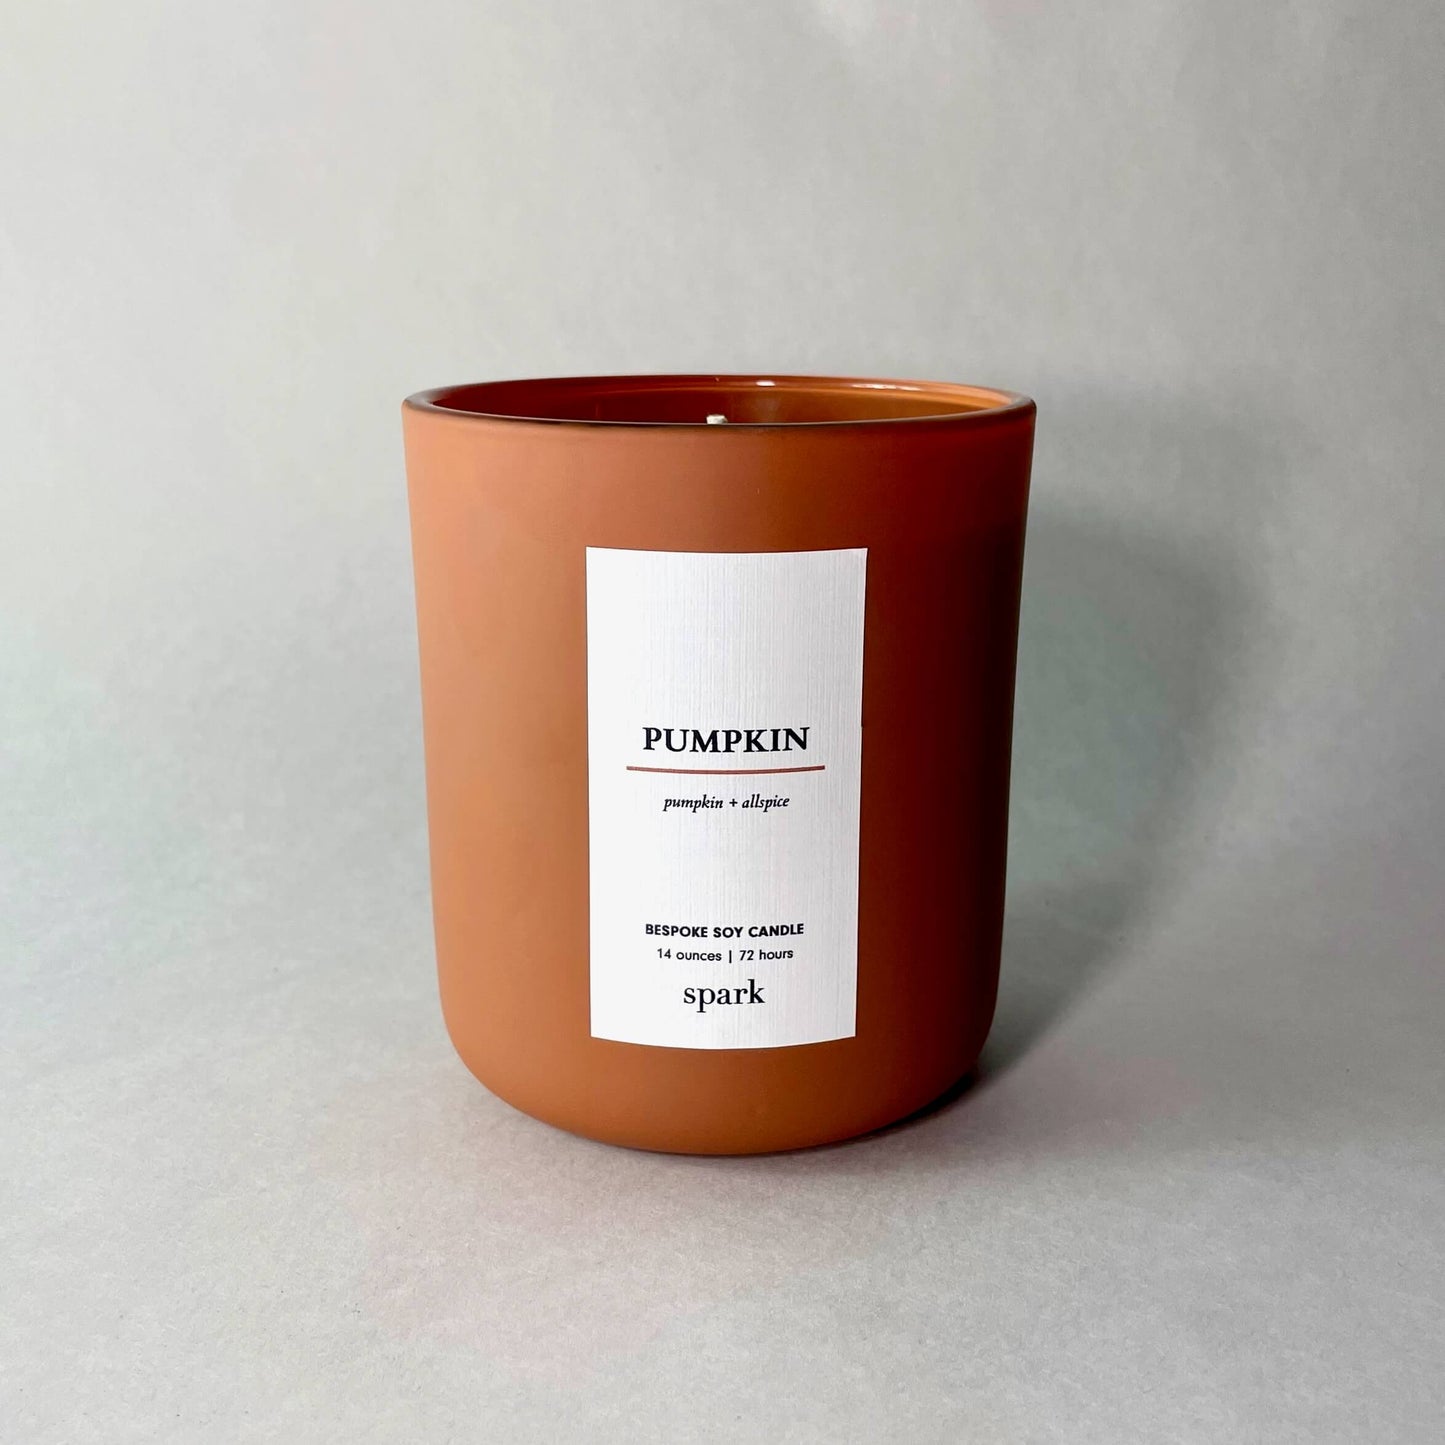 Spark Candles Custom Design Studio Pumpkin Scented Luxury Decor Soy Candle with Ripe Pumpkin, Nutmeg, Clove, Cinnamon and Black Pepper Notes